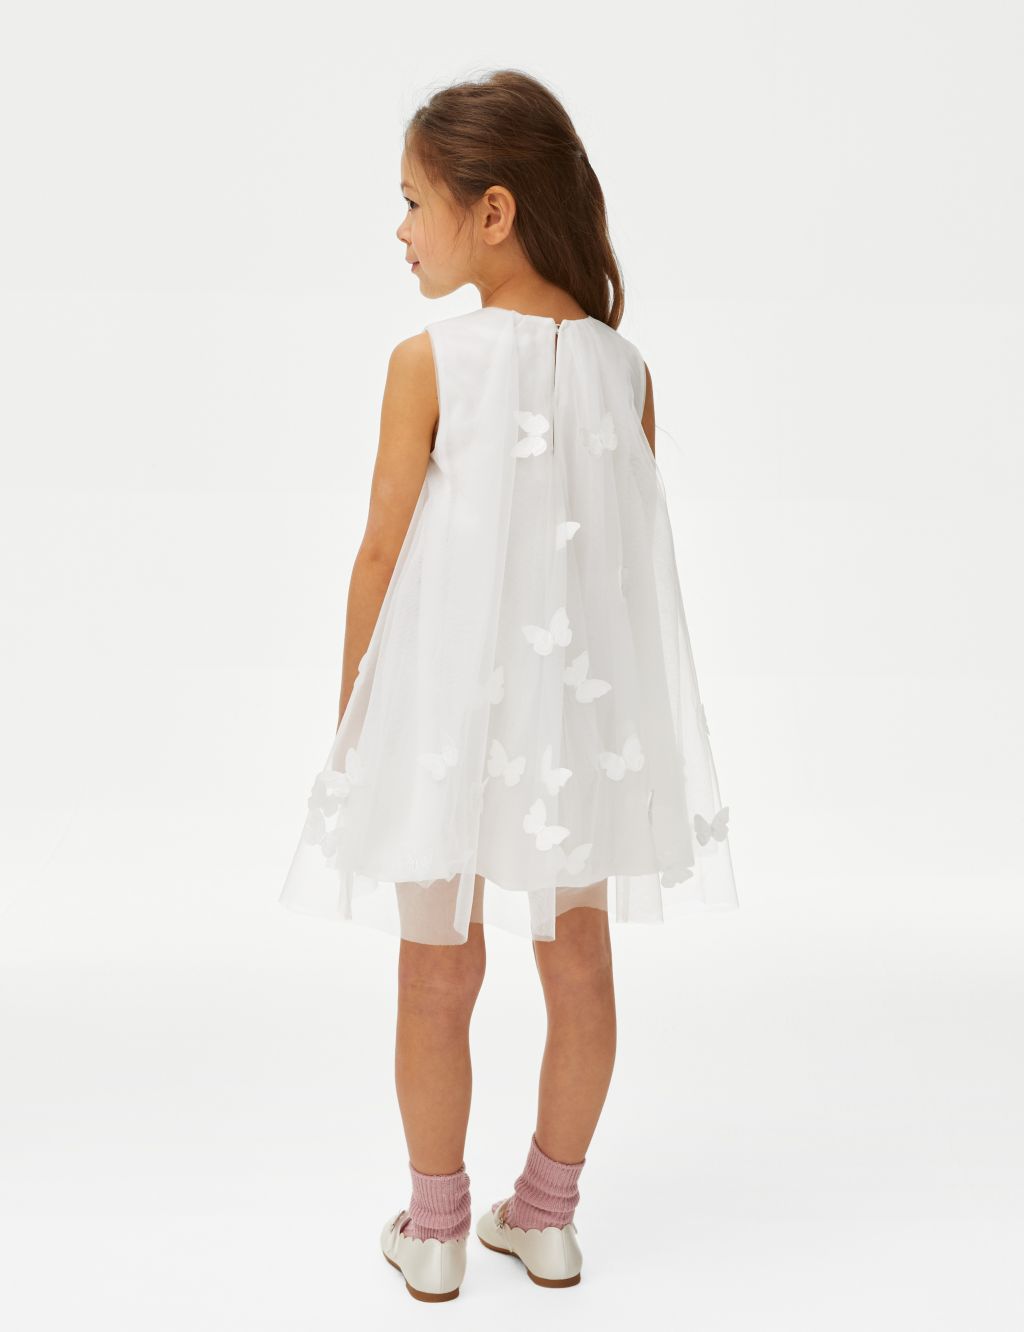 Butterfly Applique Dress (2-7 Years) image 5